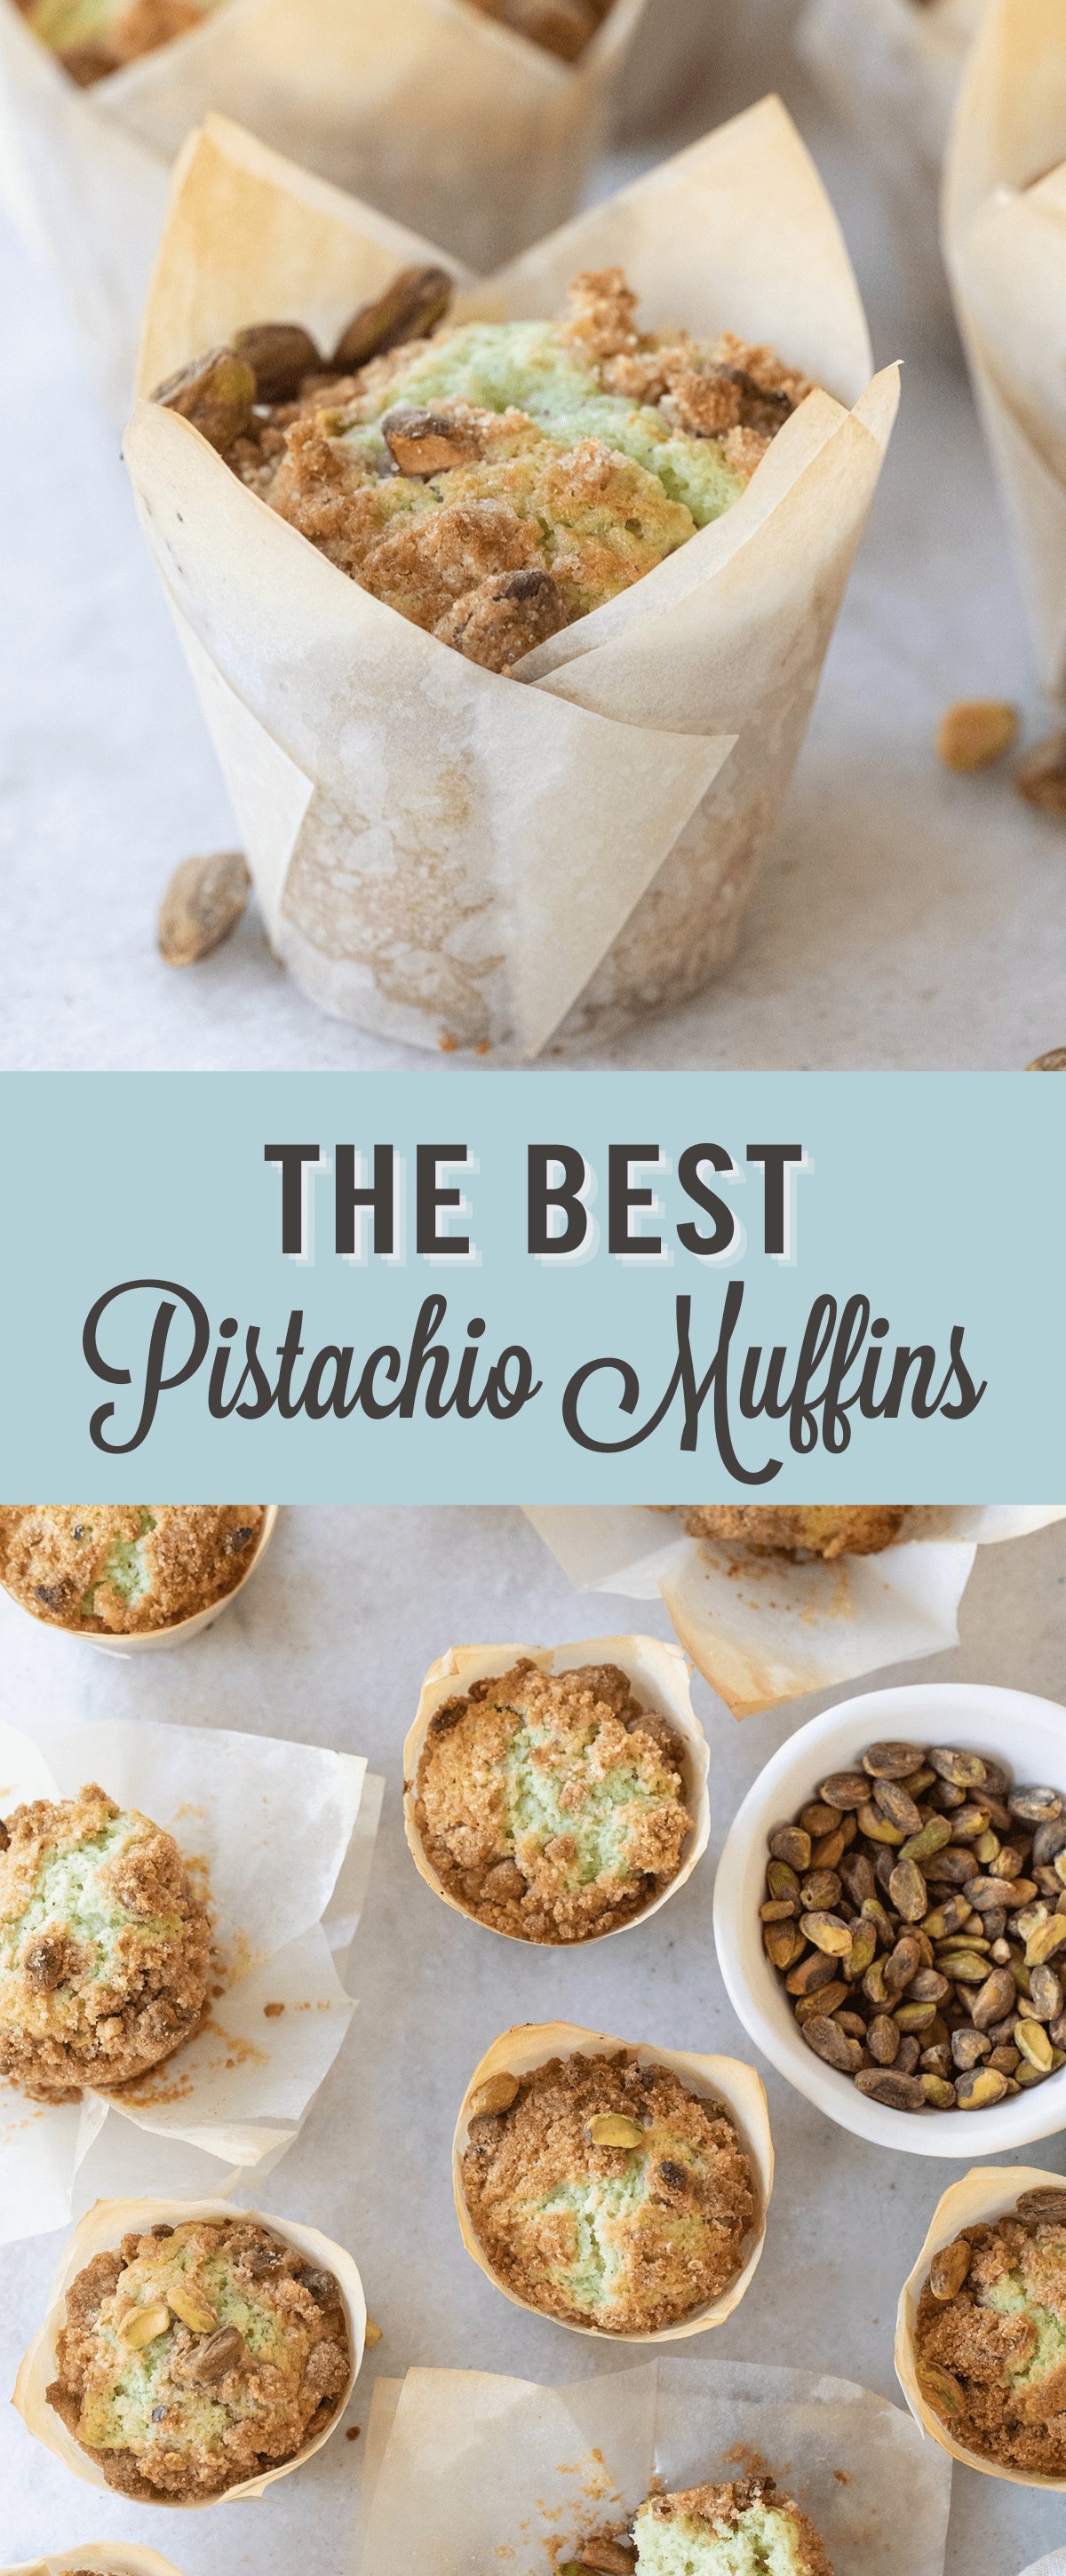 Pistachio muffins with title.